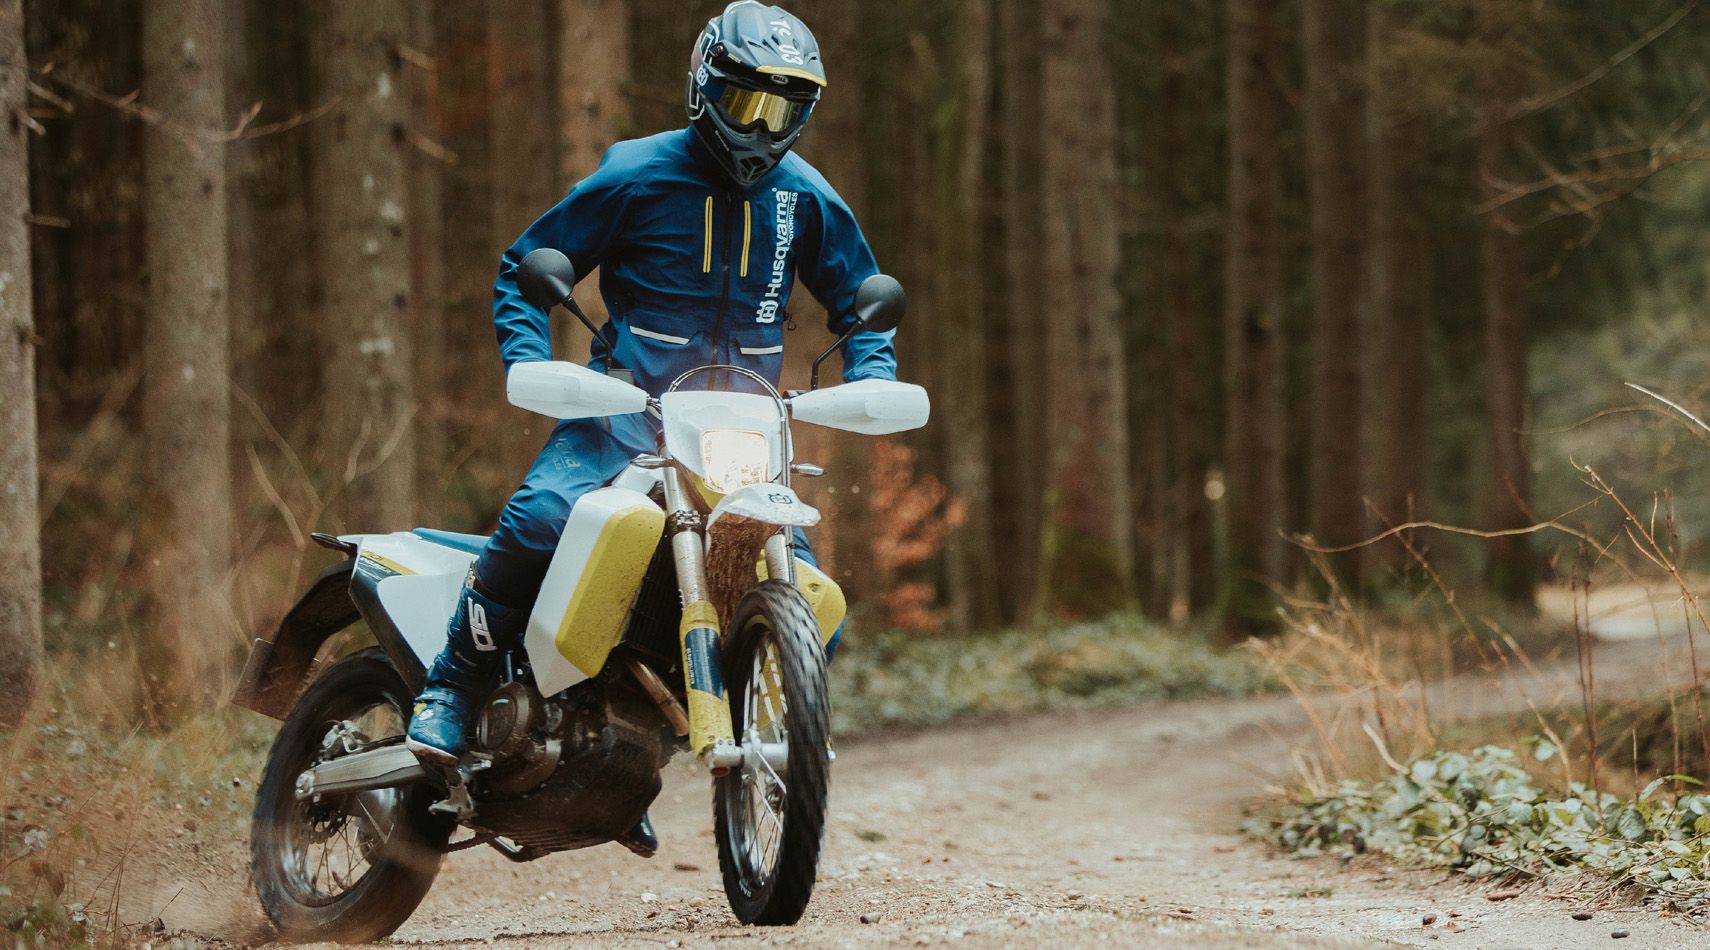 An Husqvarna 701 Enduro Is Basically A Dirt Bike With A Specific Suspension That Is Beefed Up For Trail Riding As Opposed To A Motocross Track